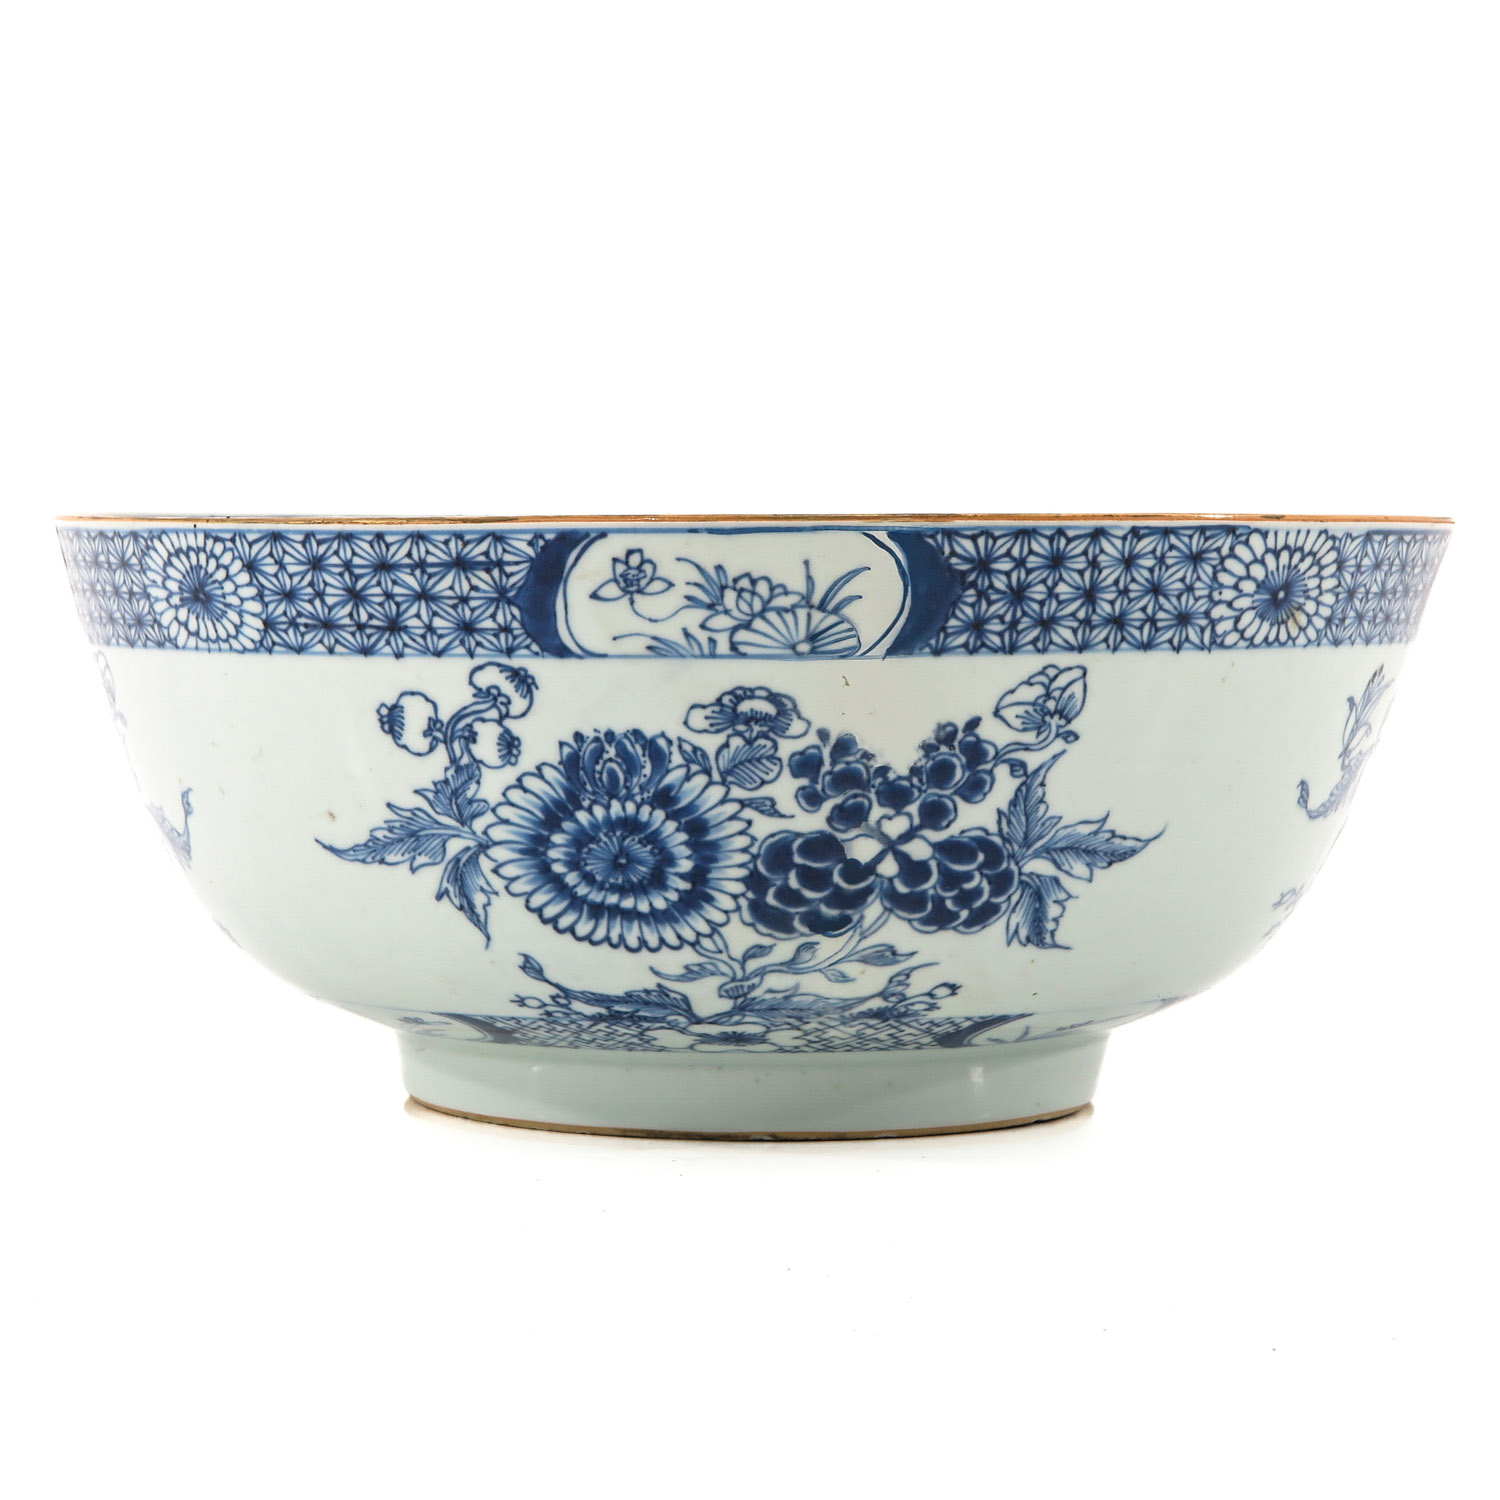 A Large Blue and White Serving Bowl - Image 3 of 9